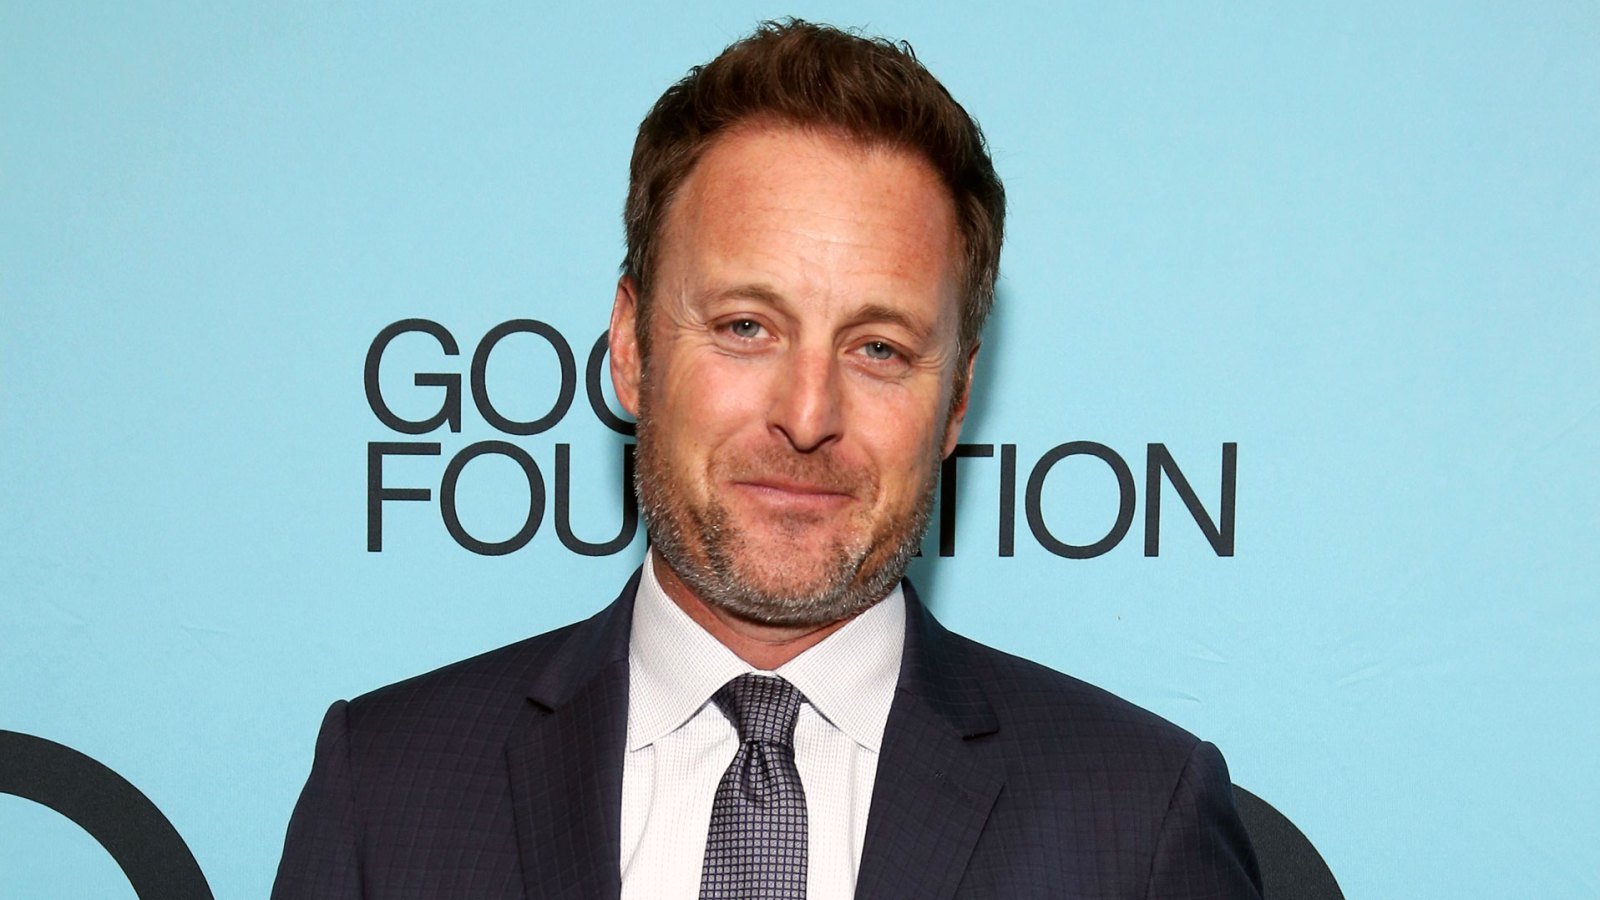 Chris Harrison Shades 2 ‘Bachelor in Paradise’ Contestants: ‘Not Really Sure Who That Is’